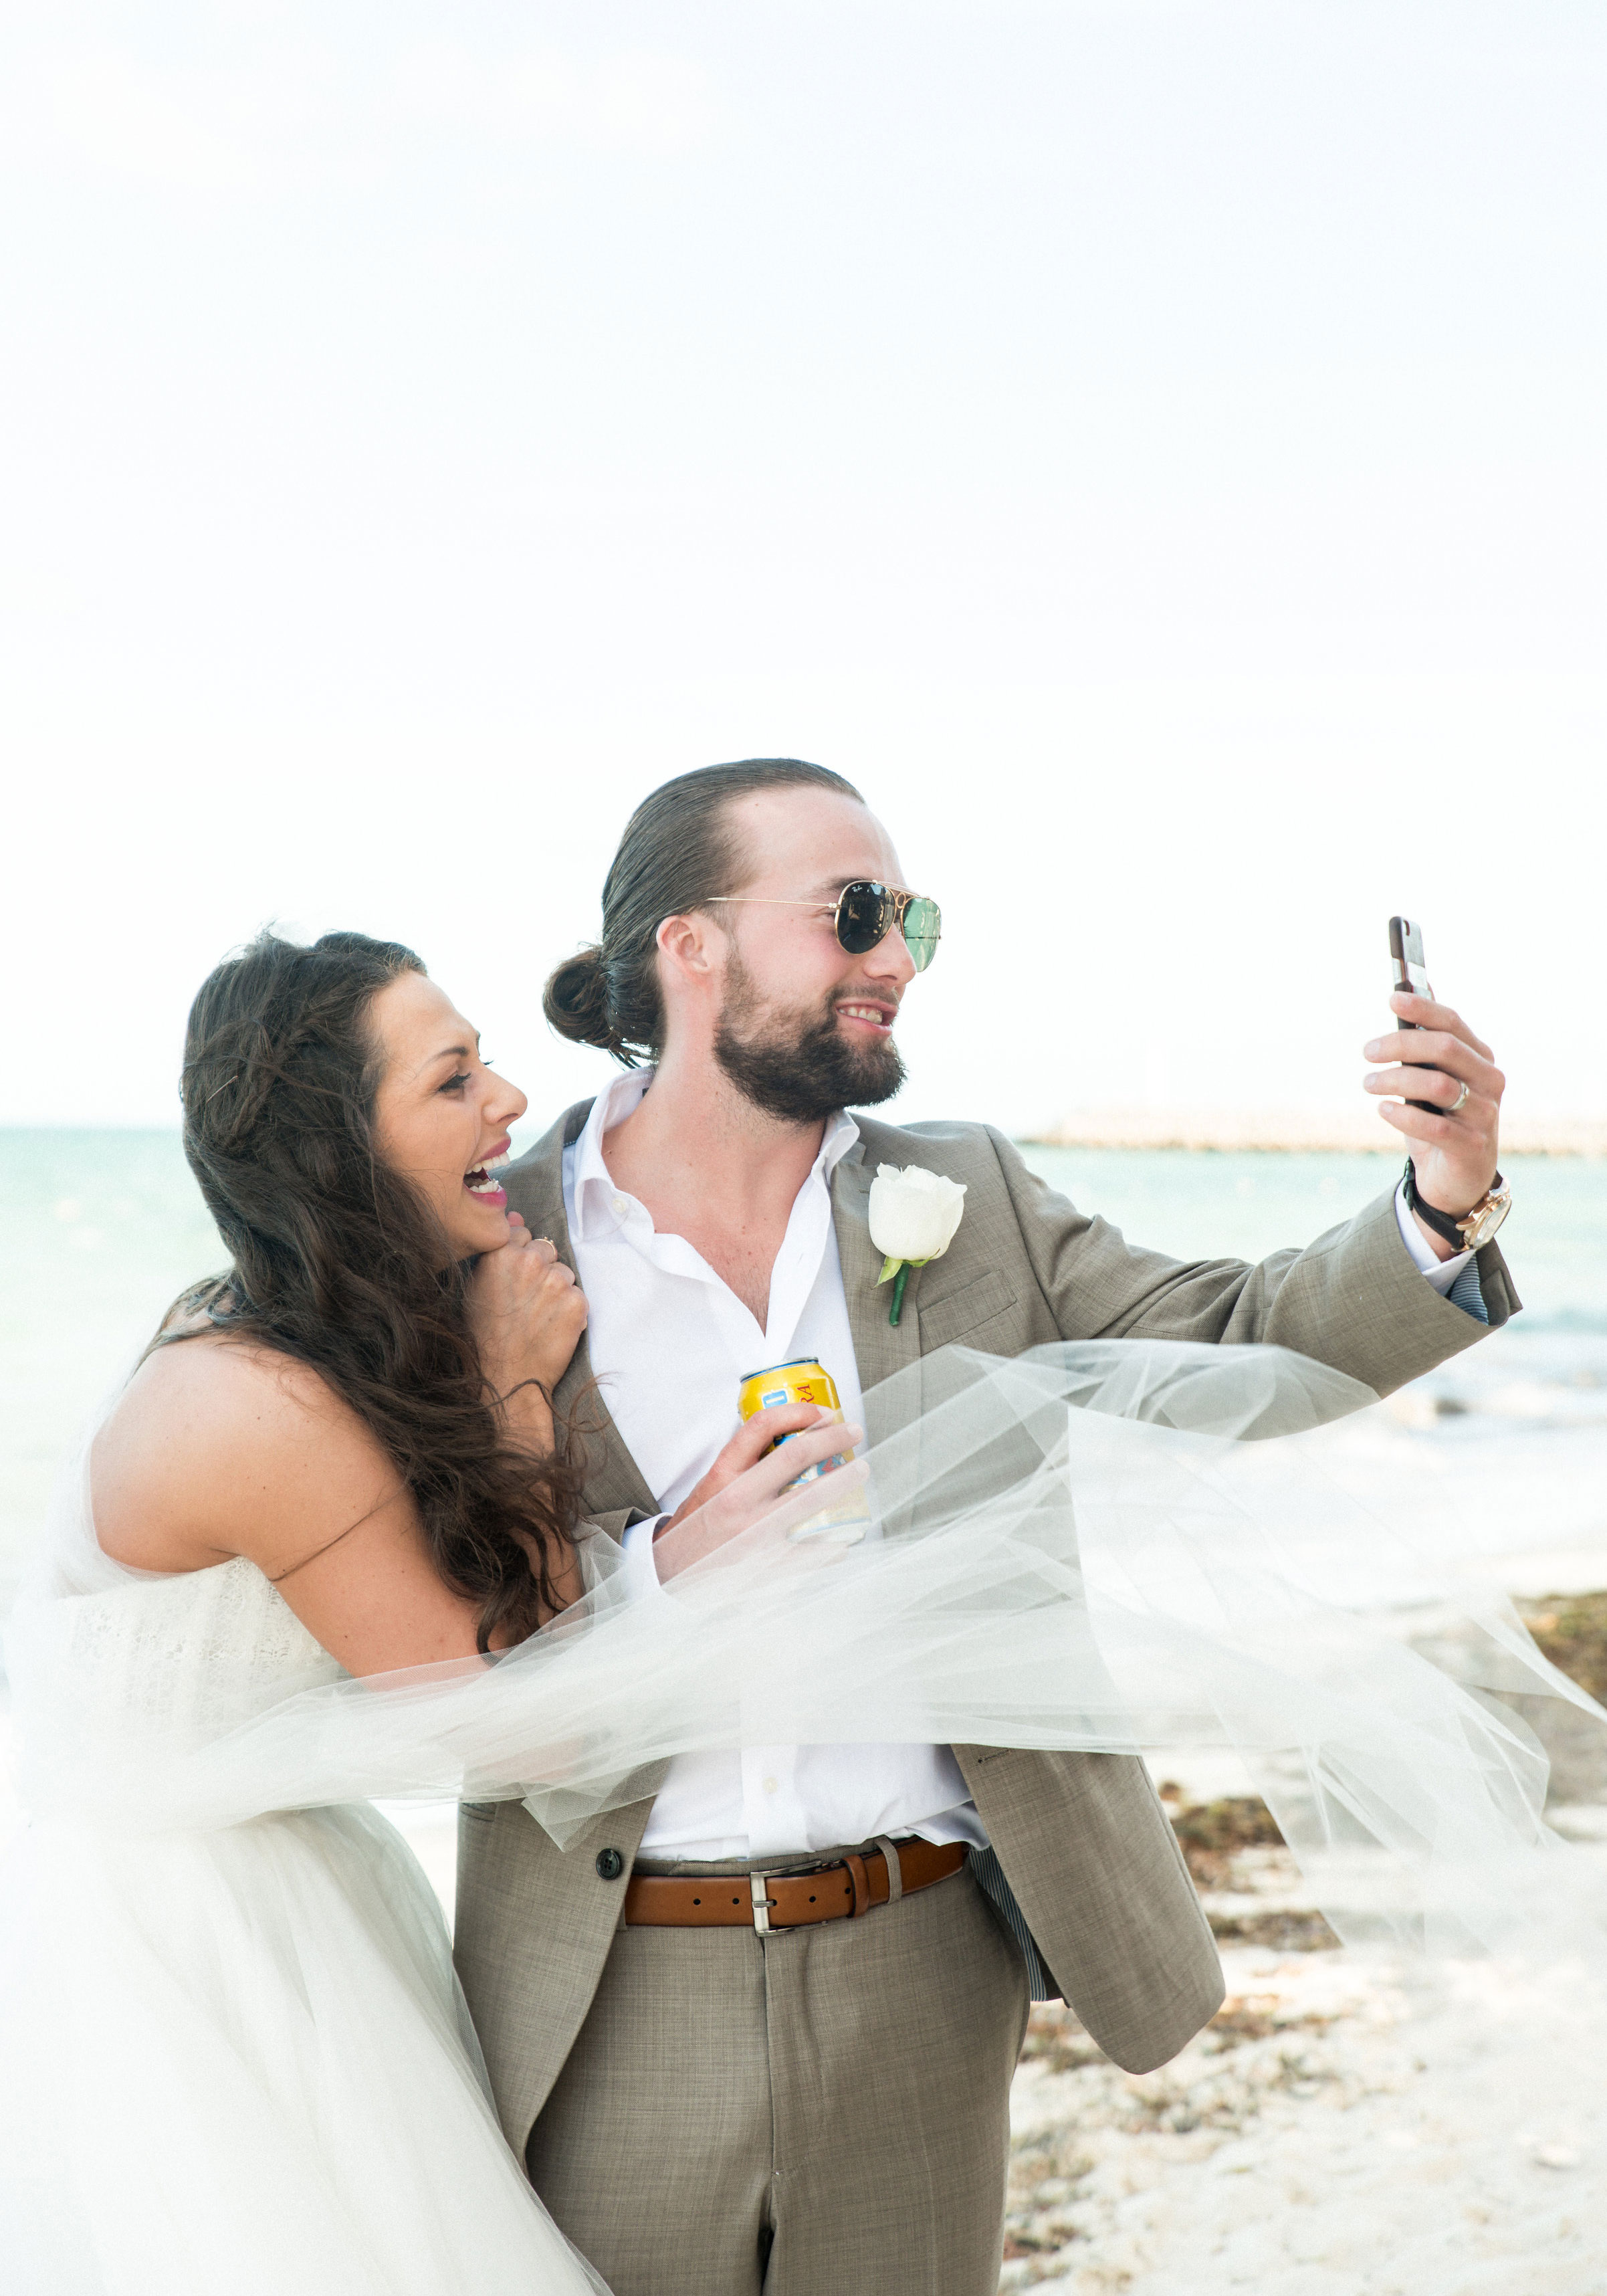 Bride and Groom facetiming family who couldn't be at their destination wedding in Mexico.